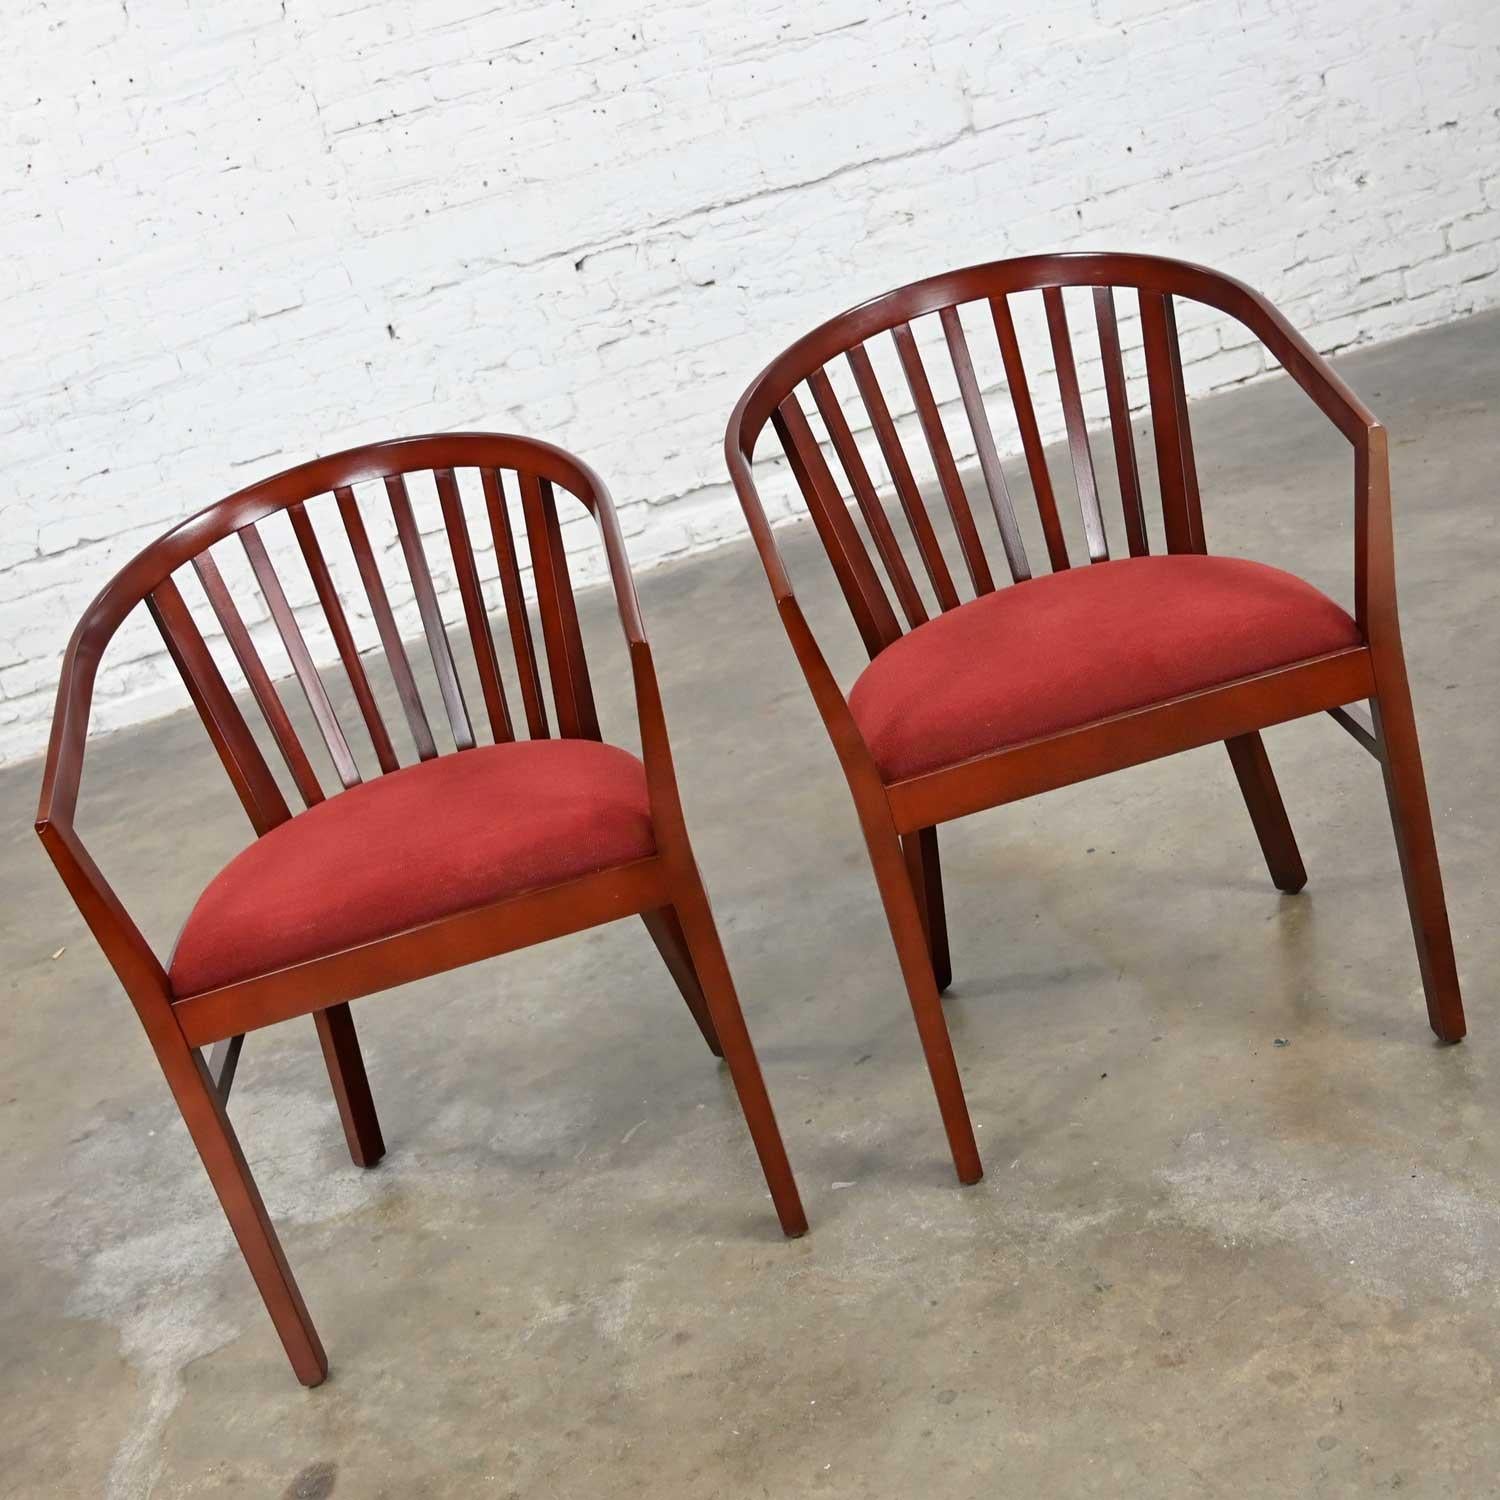 Fantastic vintage modern Herman Miller slat back armchairs comprised of brown mahogany finished wood frames with slat backs and their original burnt orange chenille seats, a pair. Beautiful condition, keeping in mind that these are vintage and not